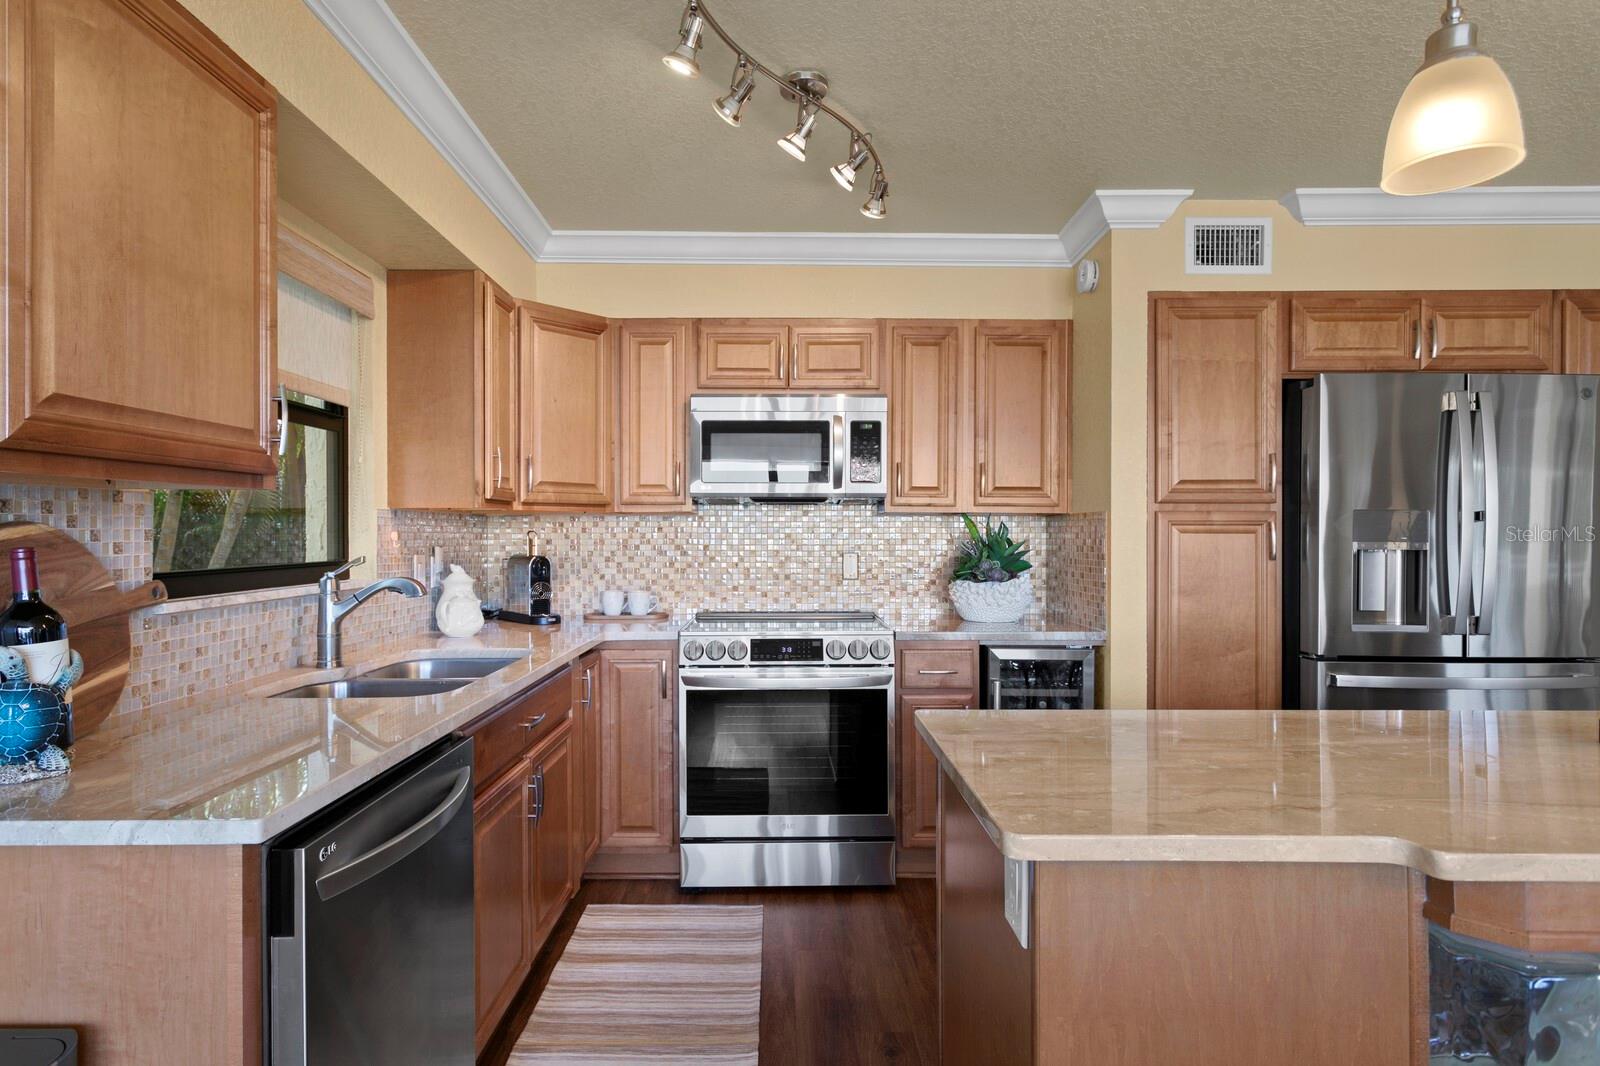 Stainless steel upgraded appliances, including wine refrigerator, and kitchen island with sitting spaces.